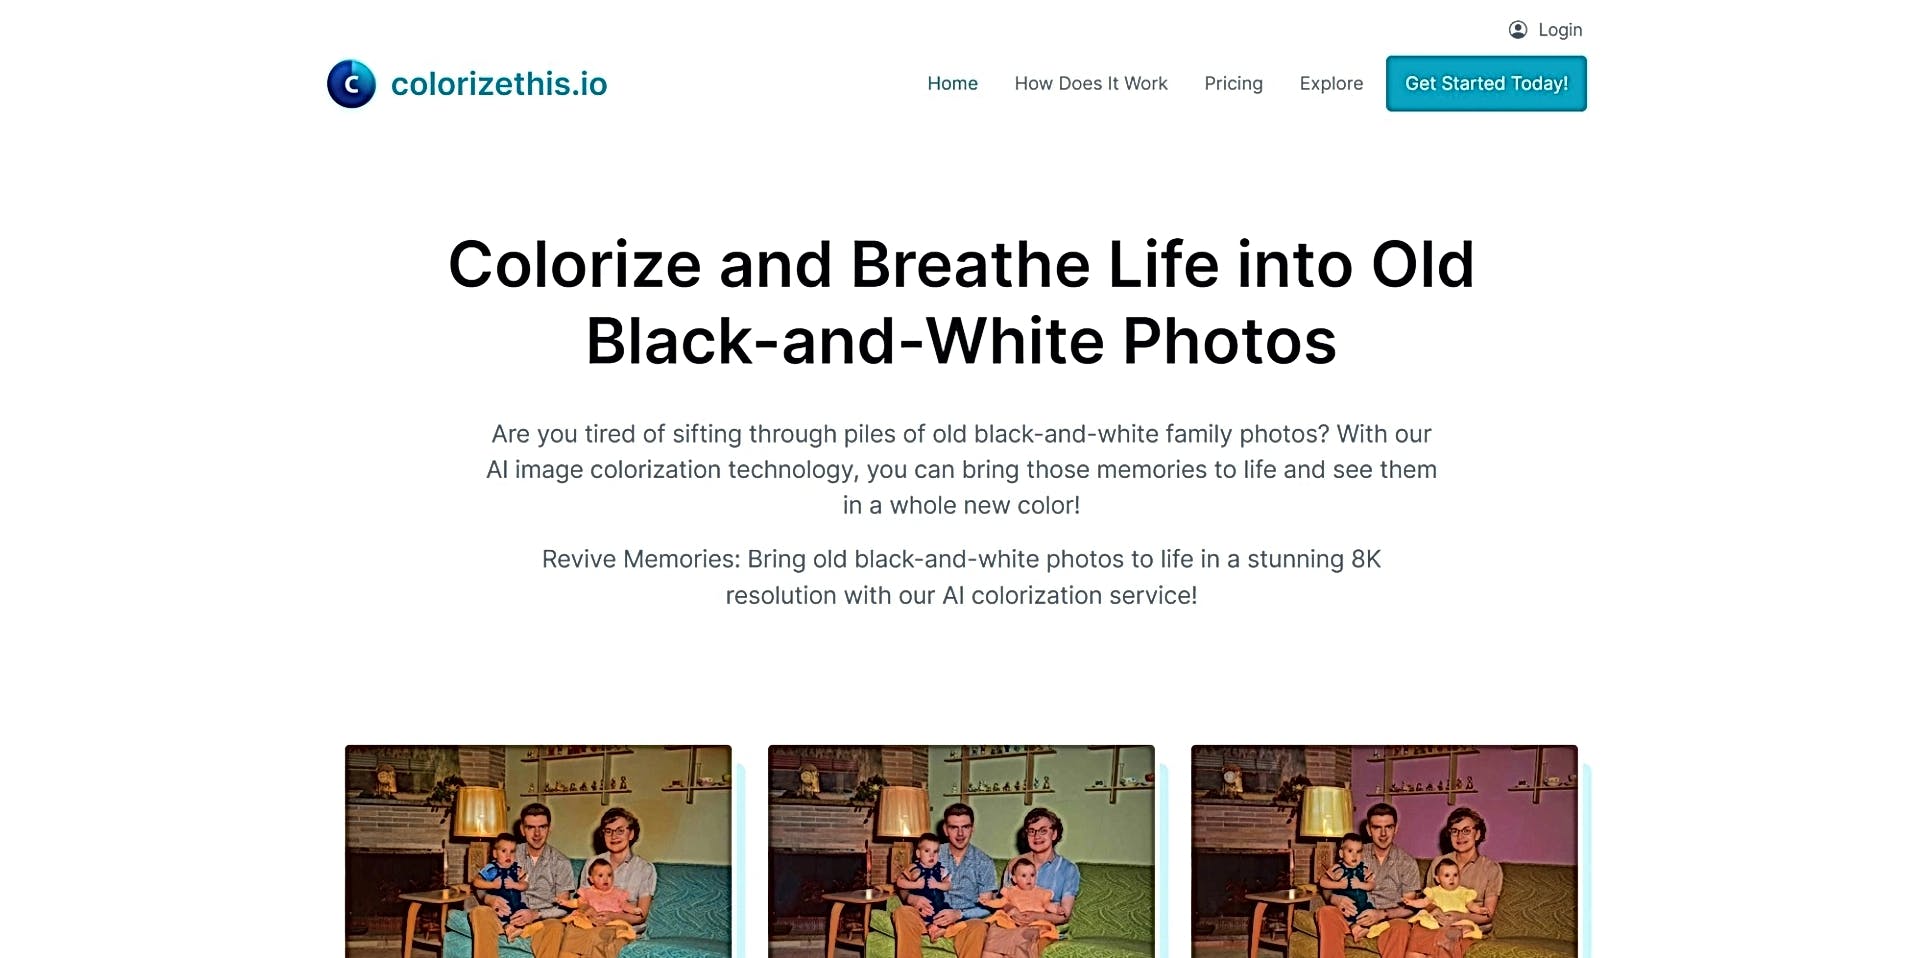 Colorizethis featured